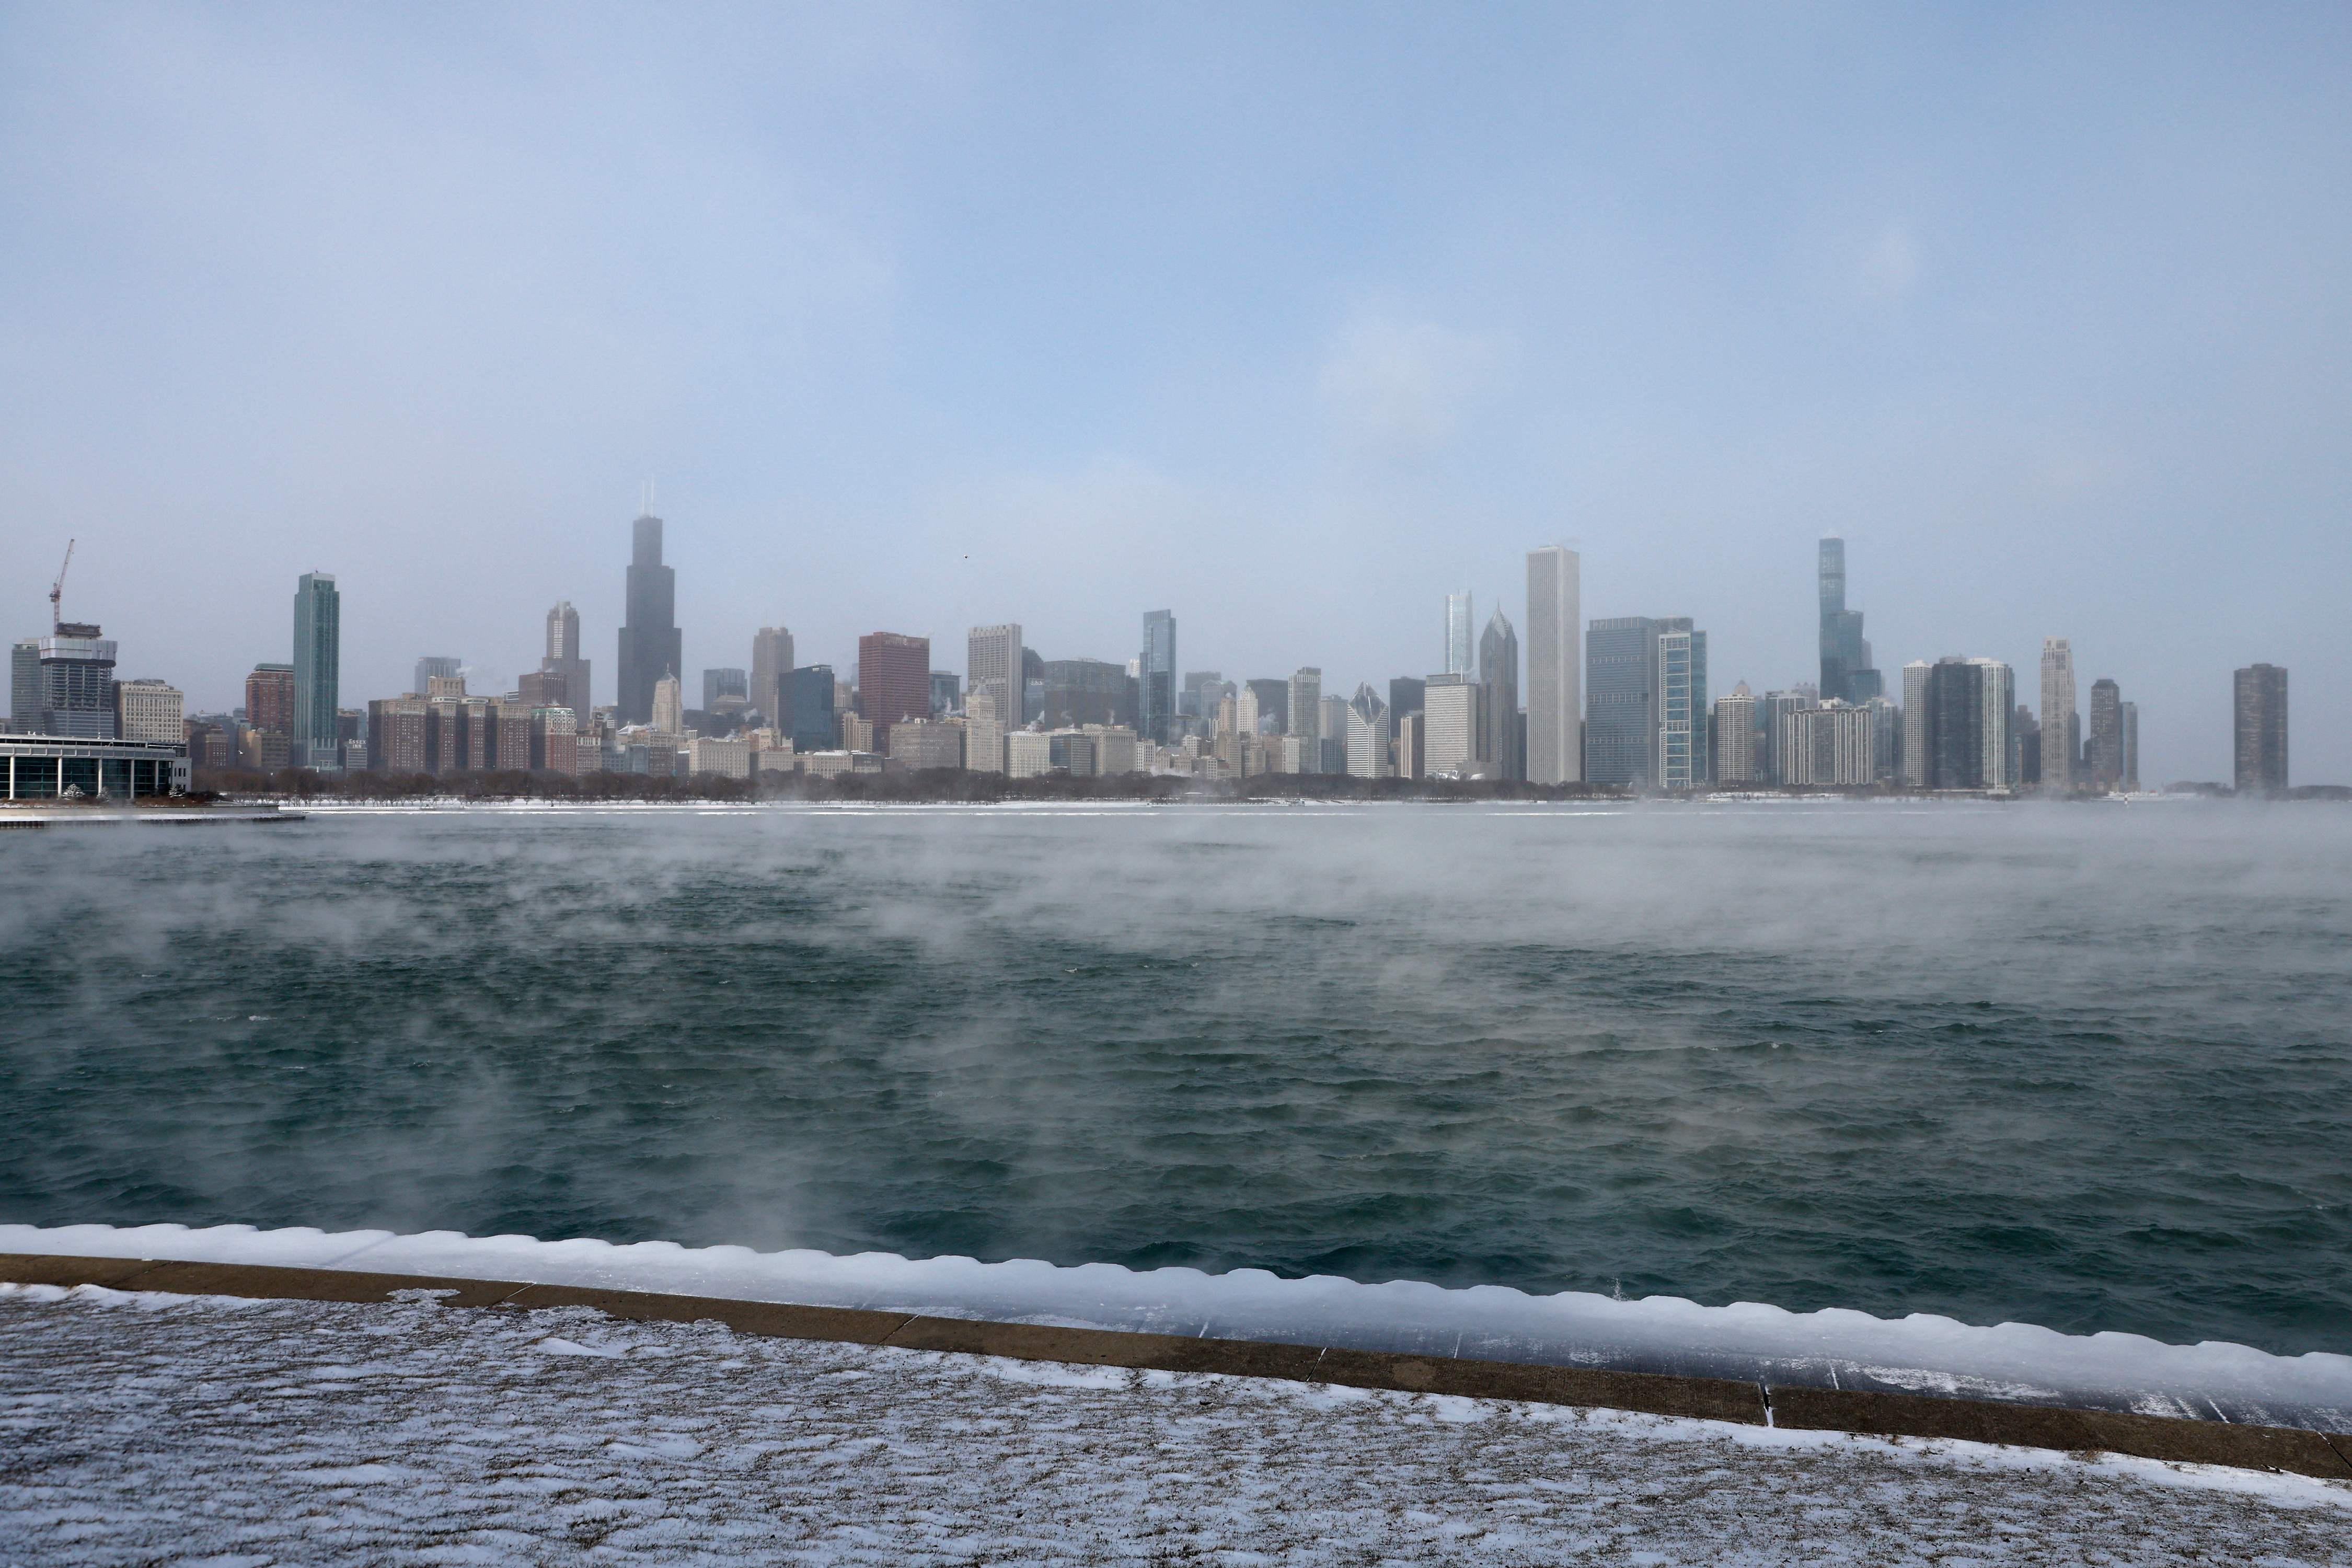 Mist rises from Lake Michigan in Chicago on December 23, 2022, where temperatures reached -6F (-21C) ahead of the Christmas holiday